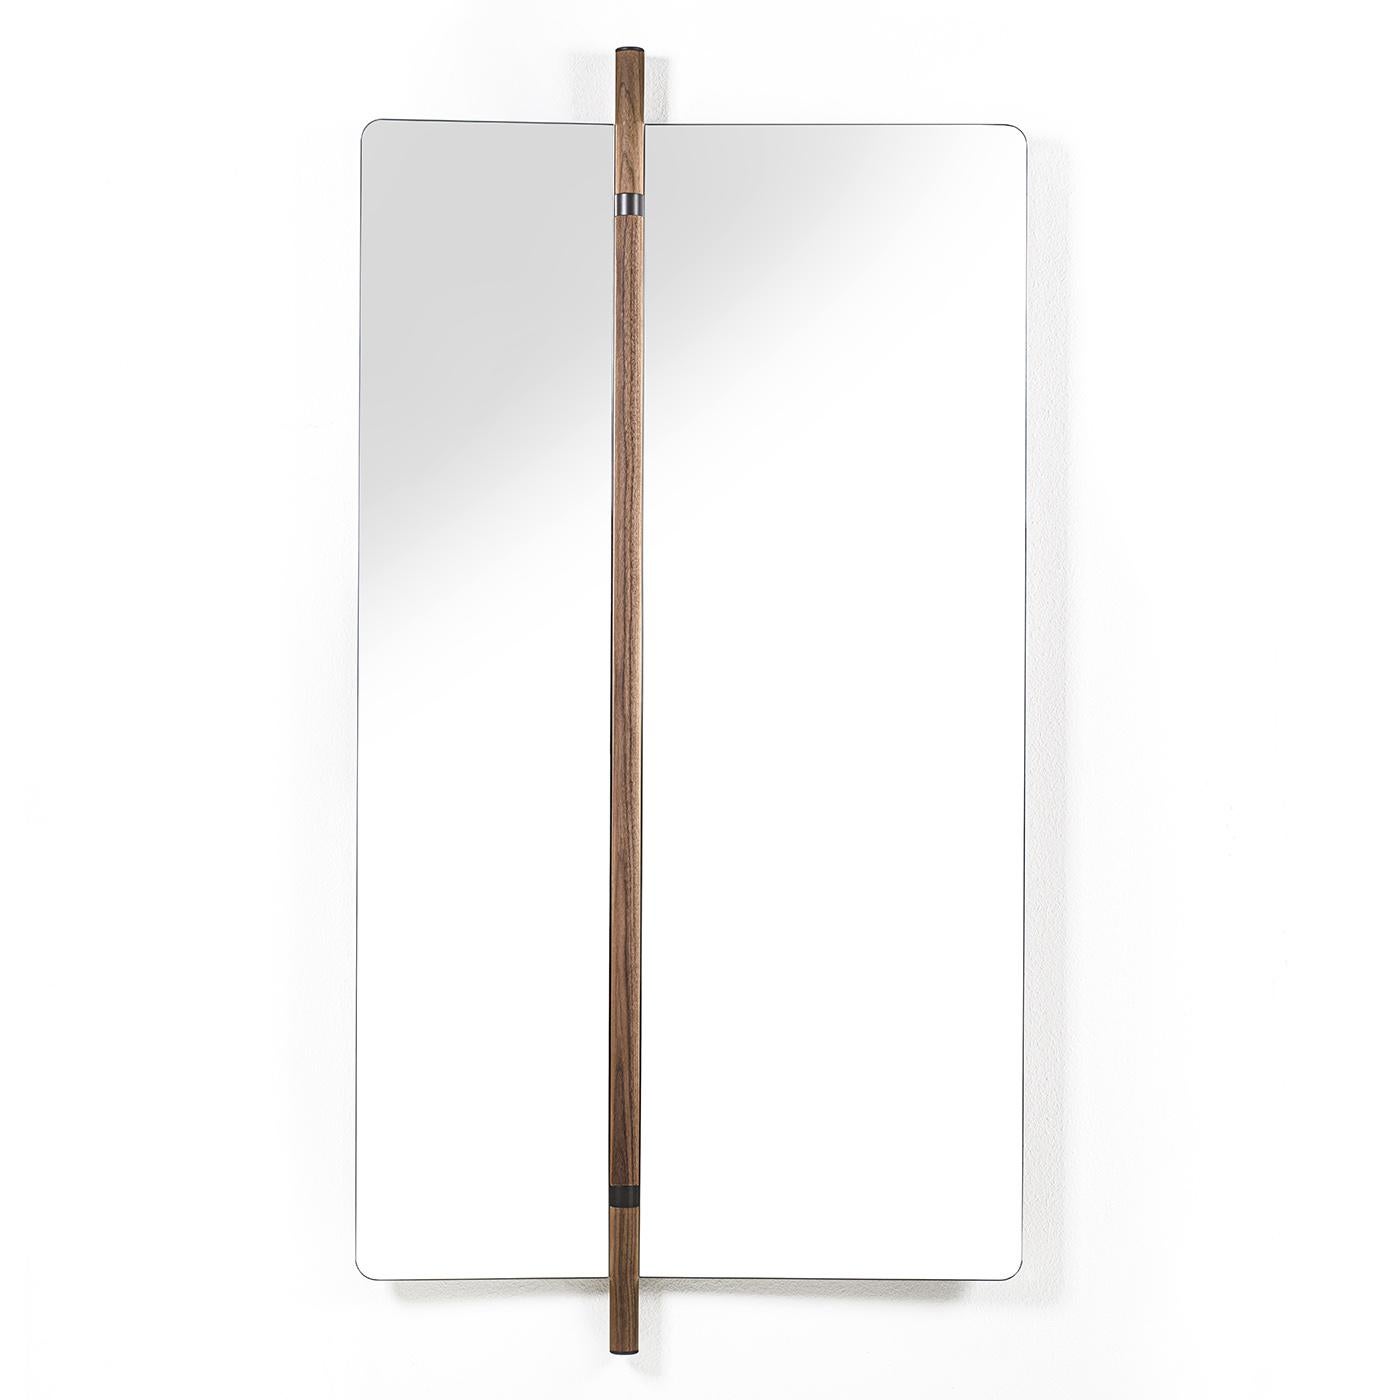 Mirror Amnesia composed of 2 folding glass mirros with solid walnut back.
With a central pole in solid walnut with metal parts in grey finish included.
92cm when opened and and 57cm when folded.